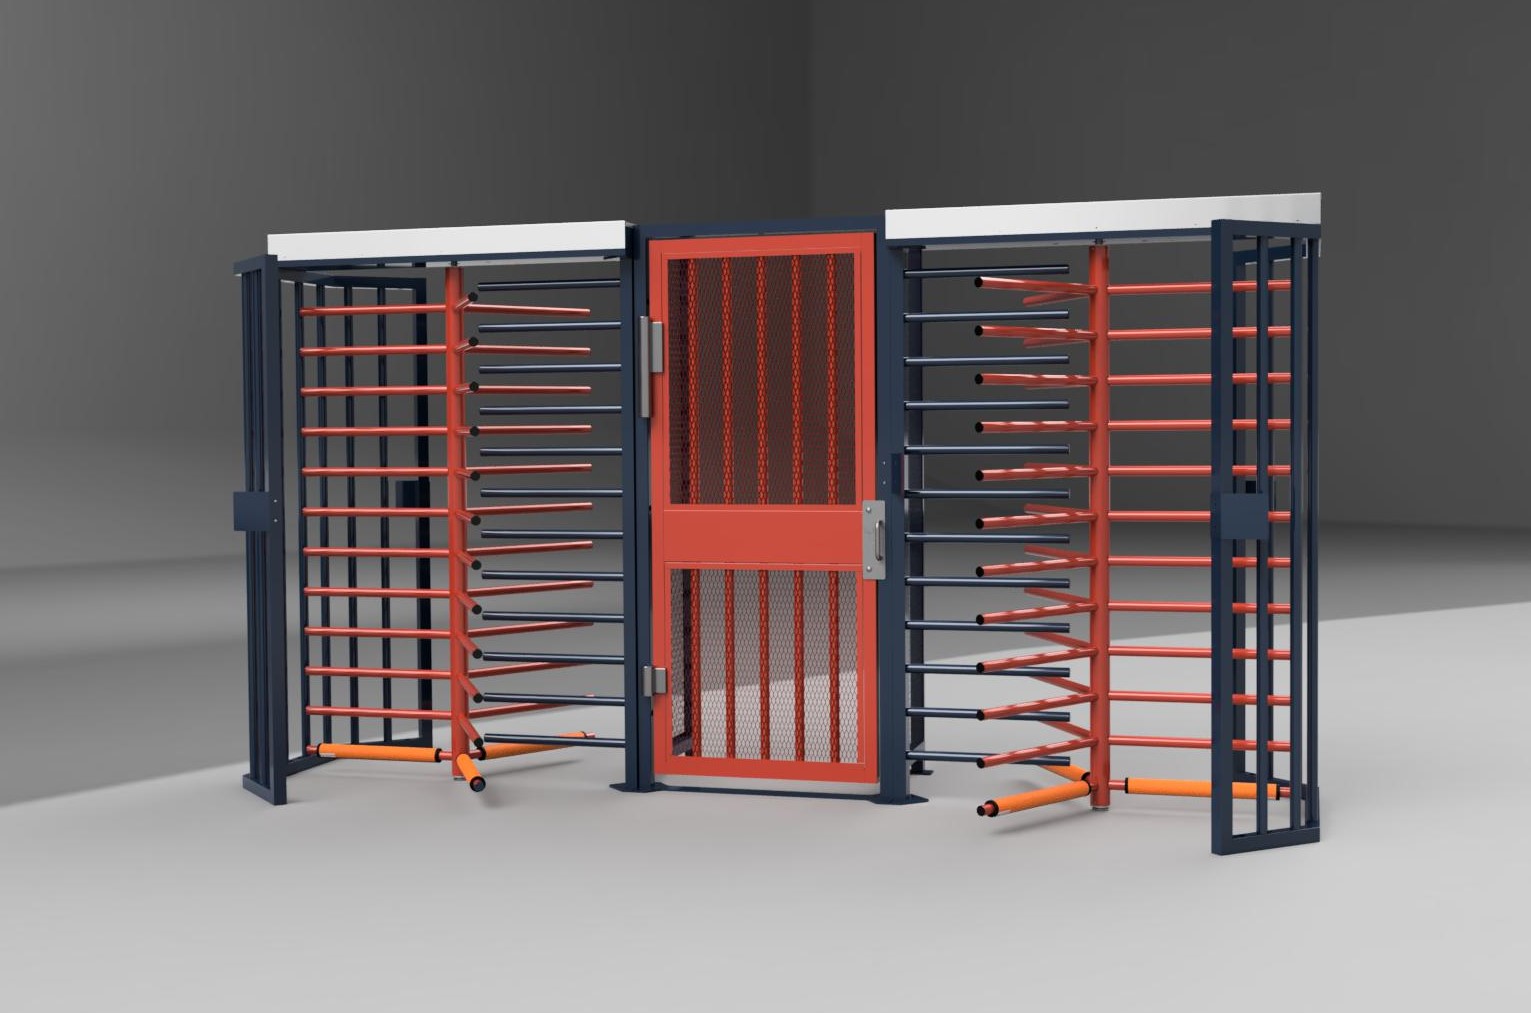 2 full height turnstiles with a full height gate between them in a custom orange and blue high gloss powder coat colorway